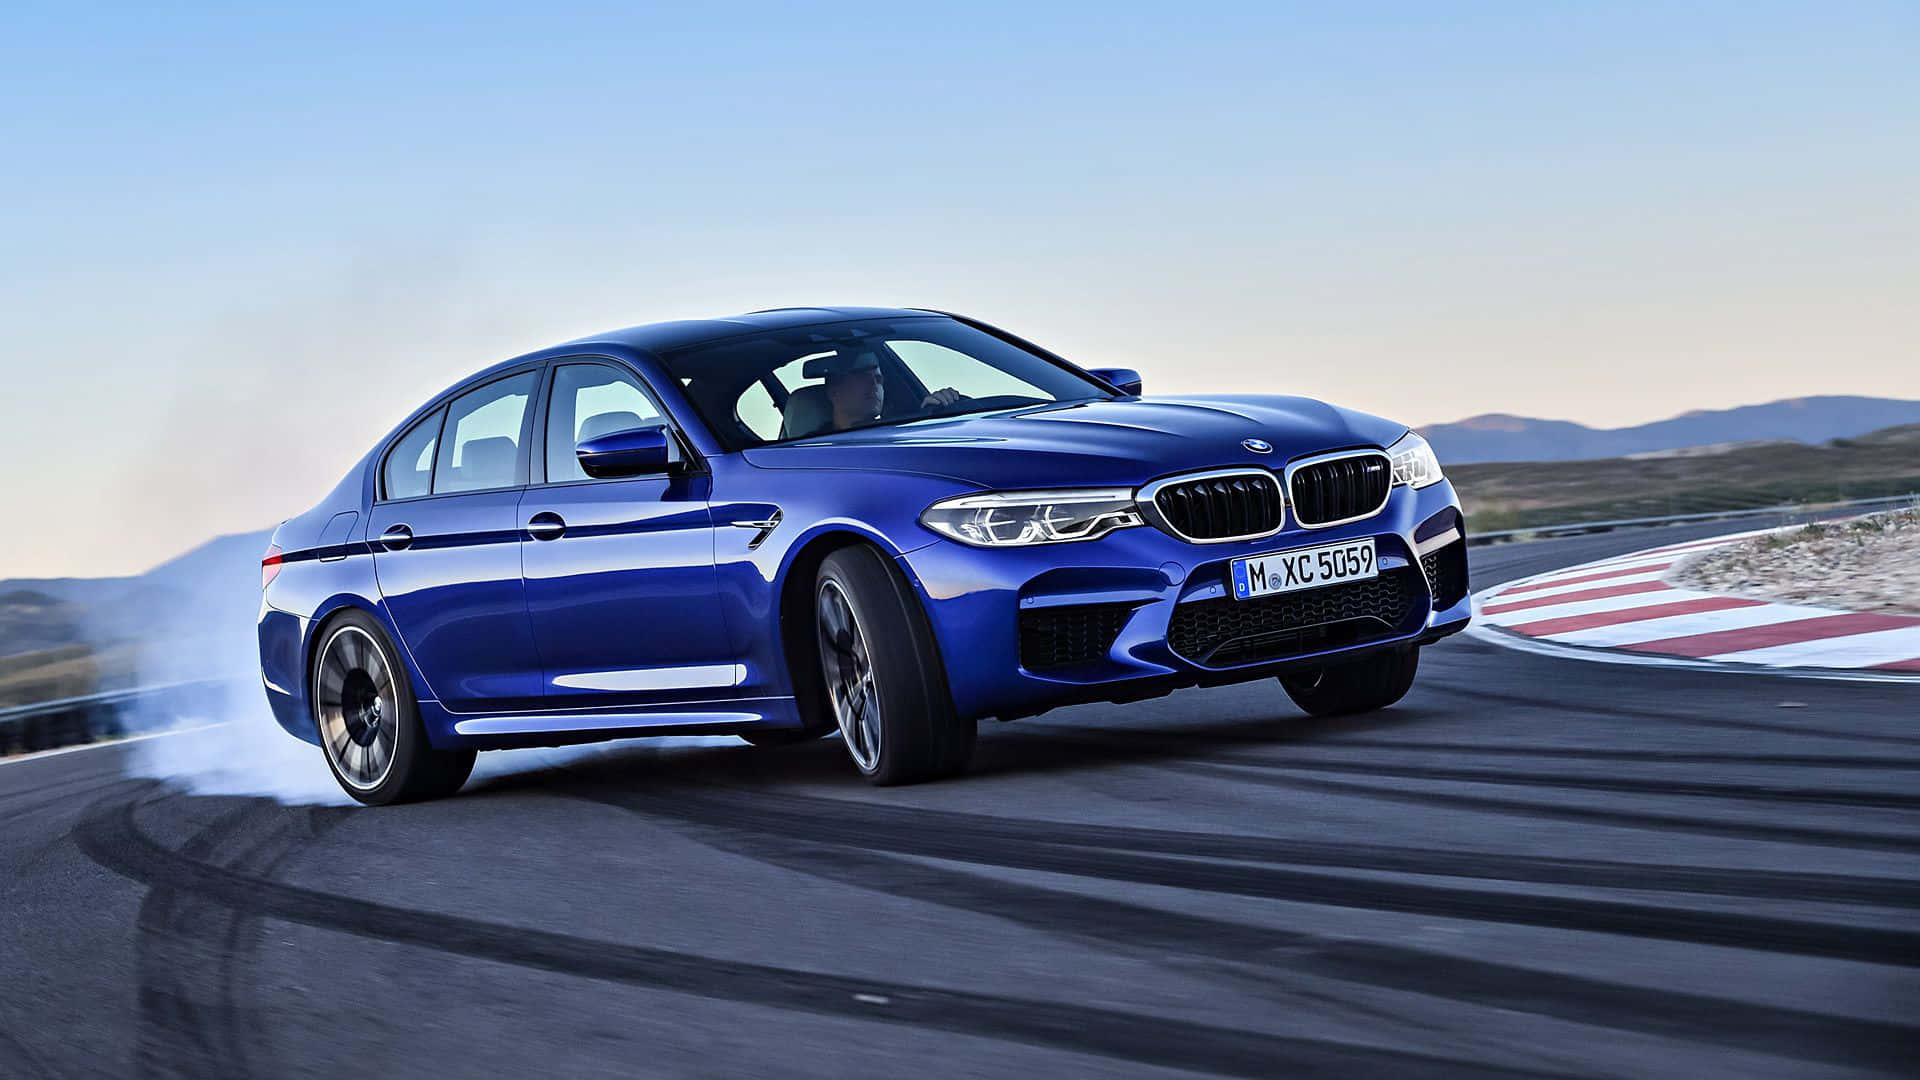 Sleek and Powerful BMW M5 in Action Wallpaper